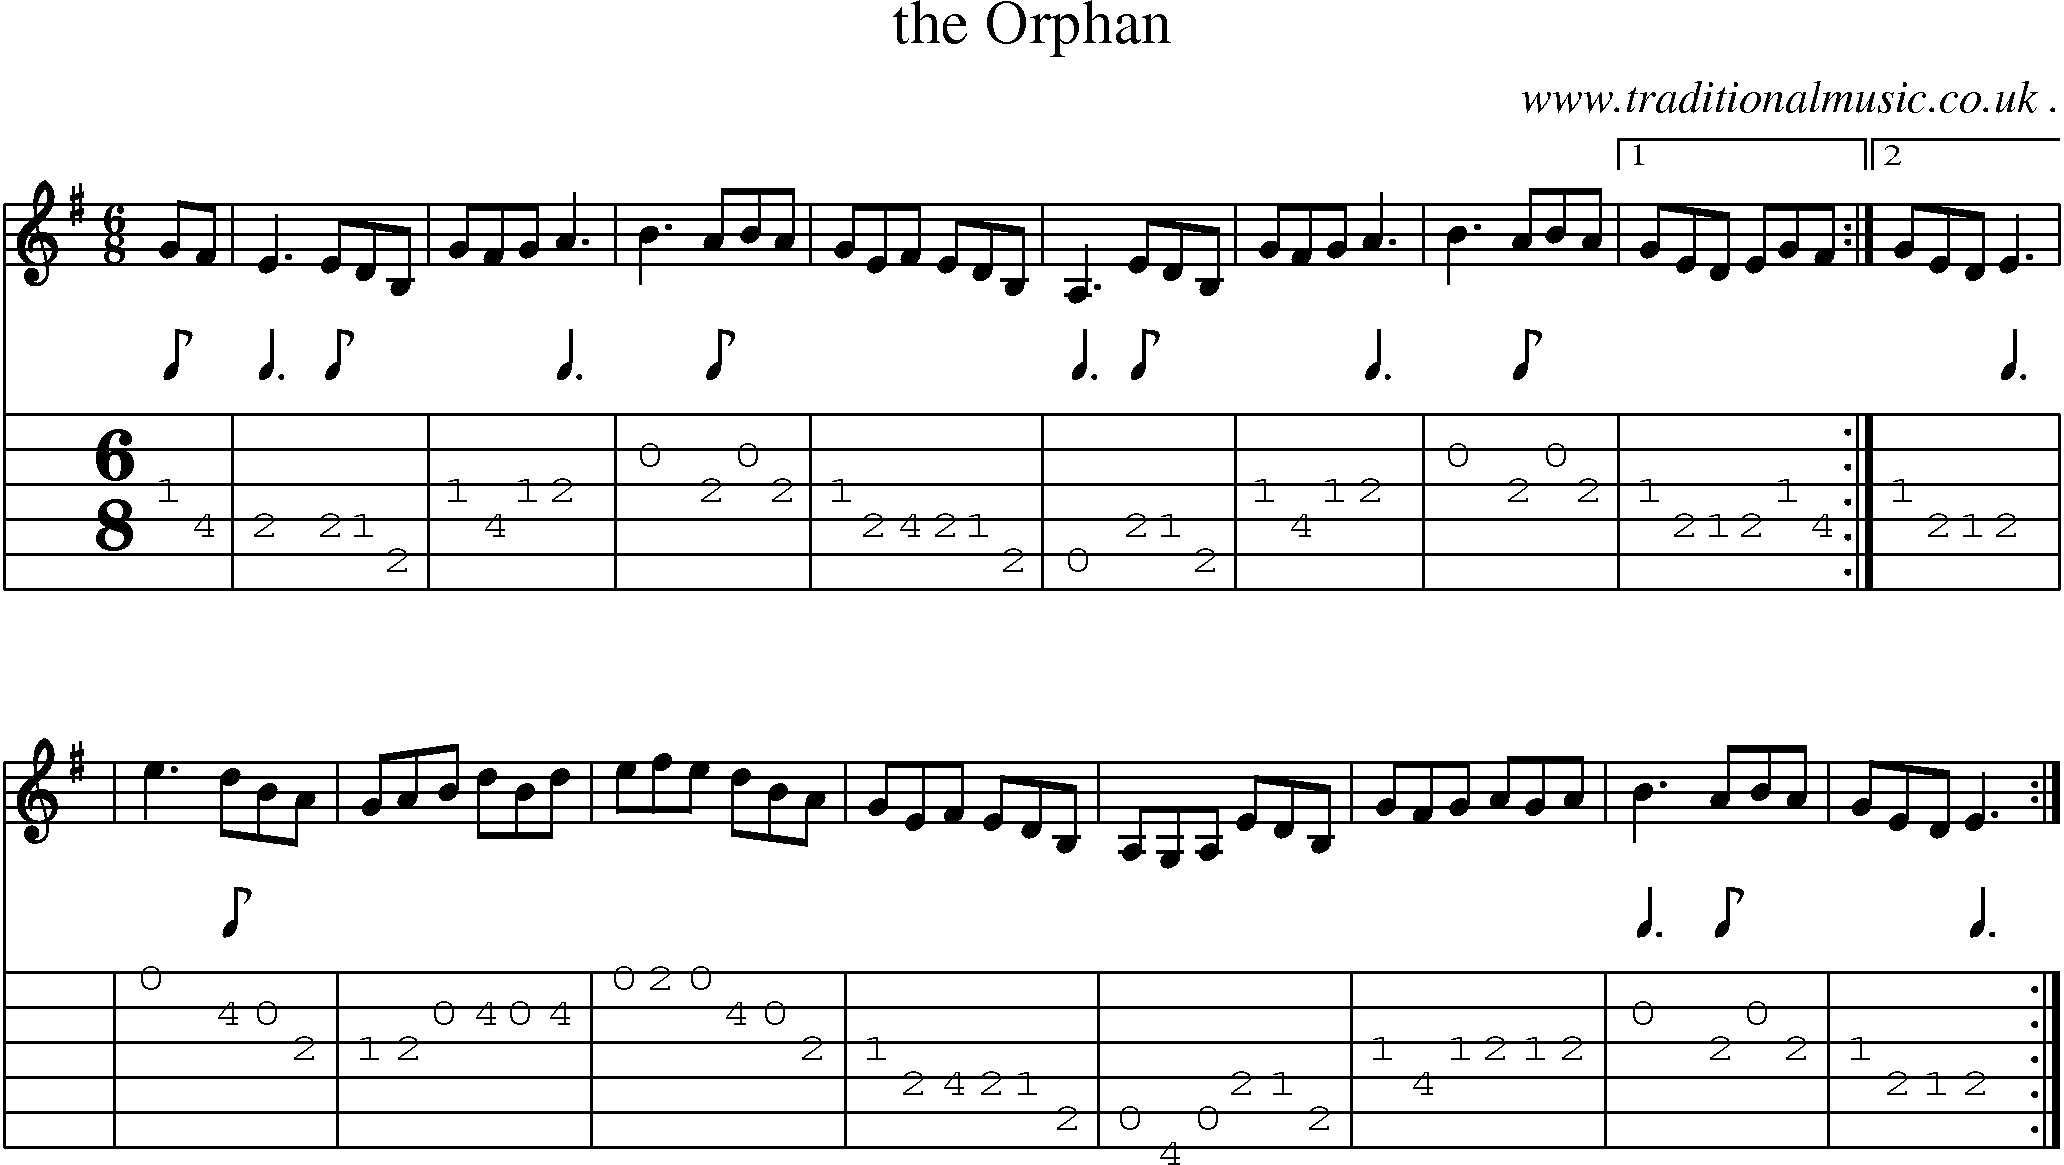 Sheet-music  score, Chords and Guitar Tabs for The Orphan